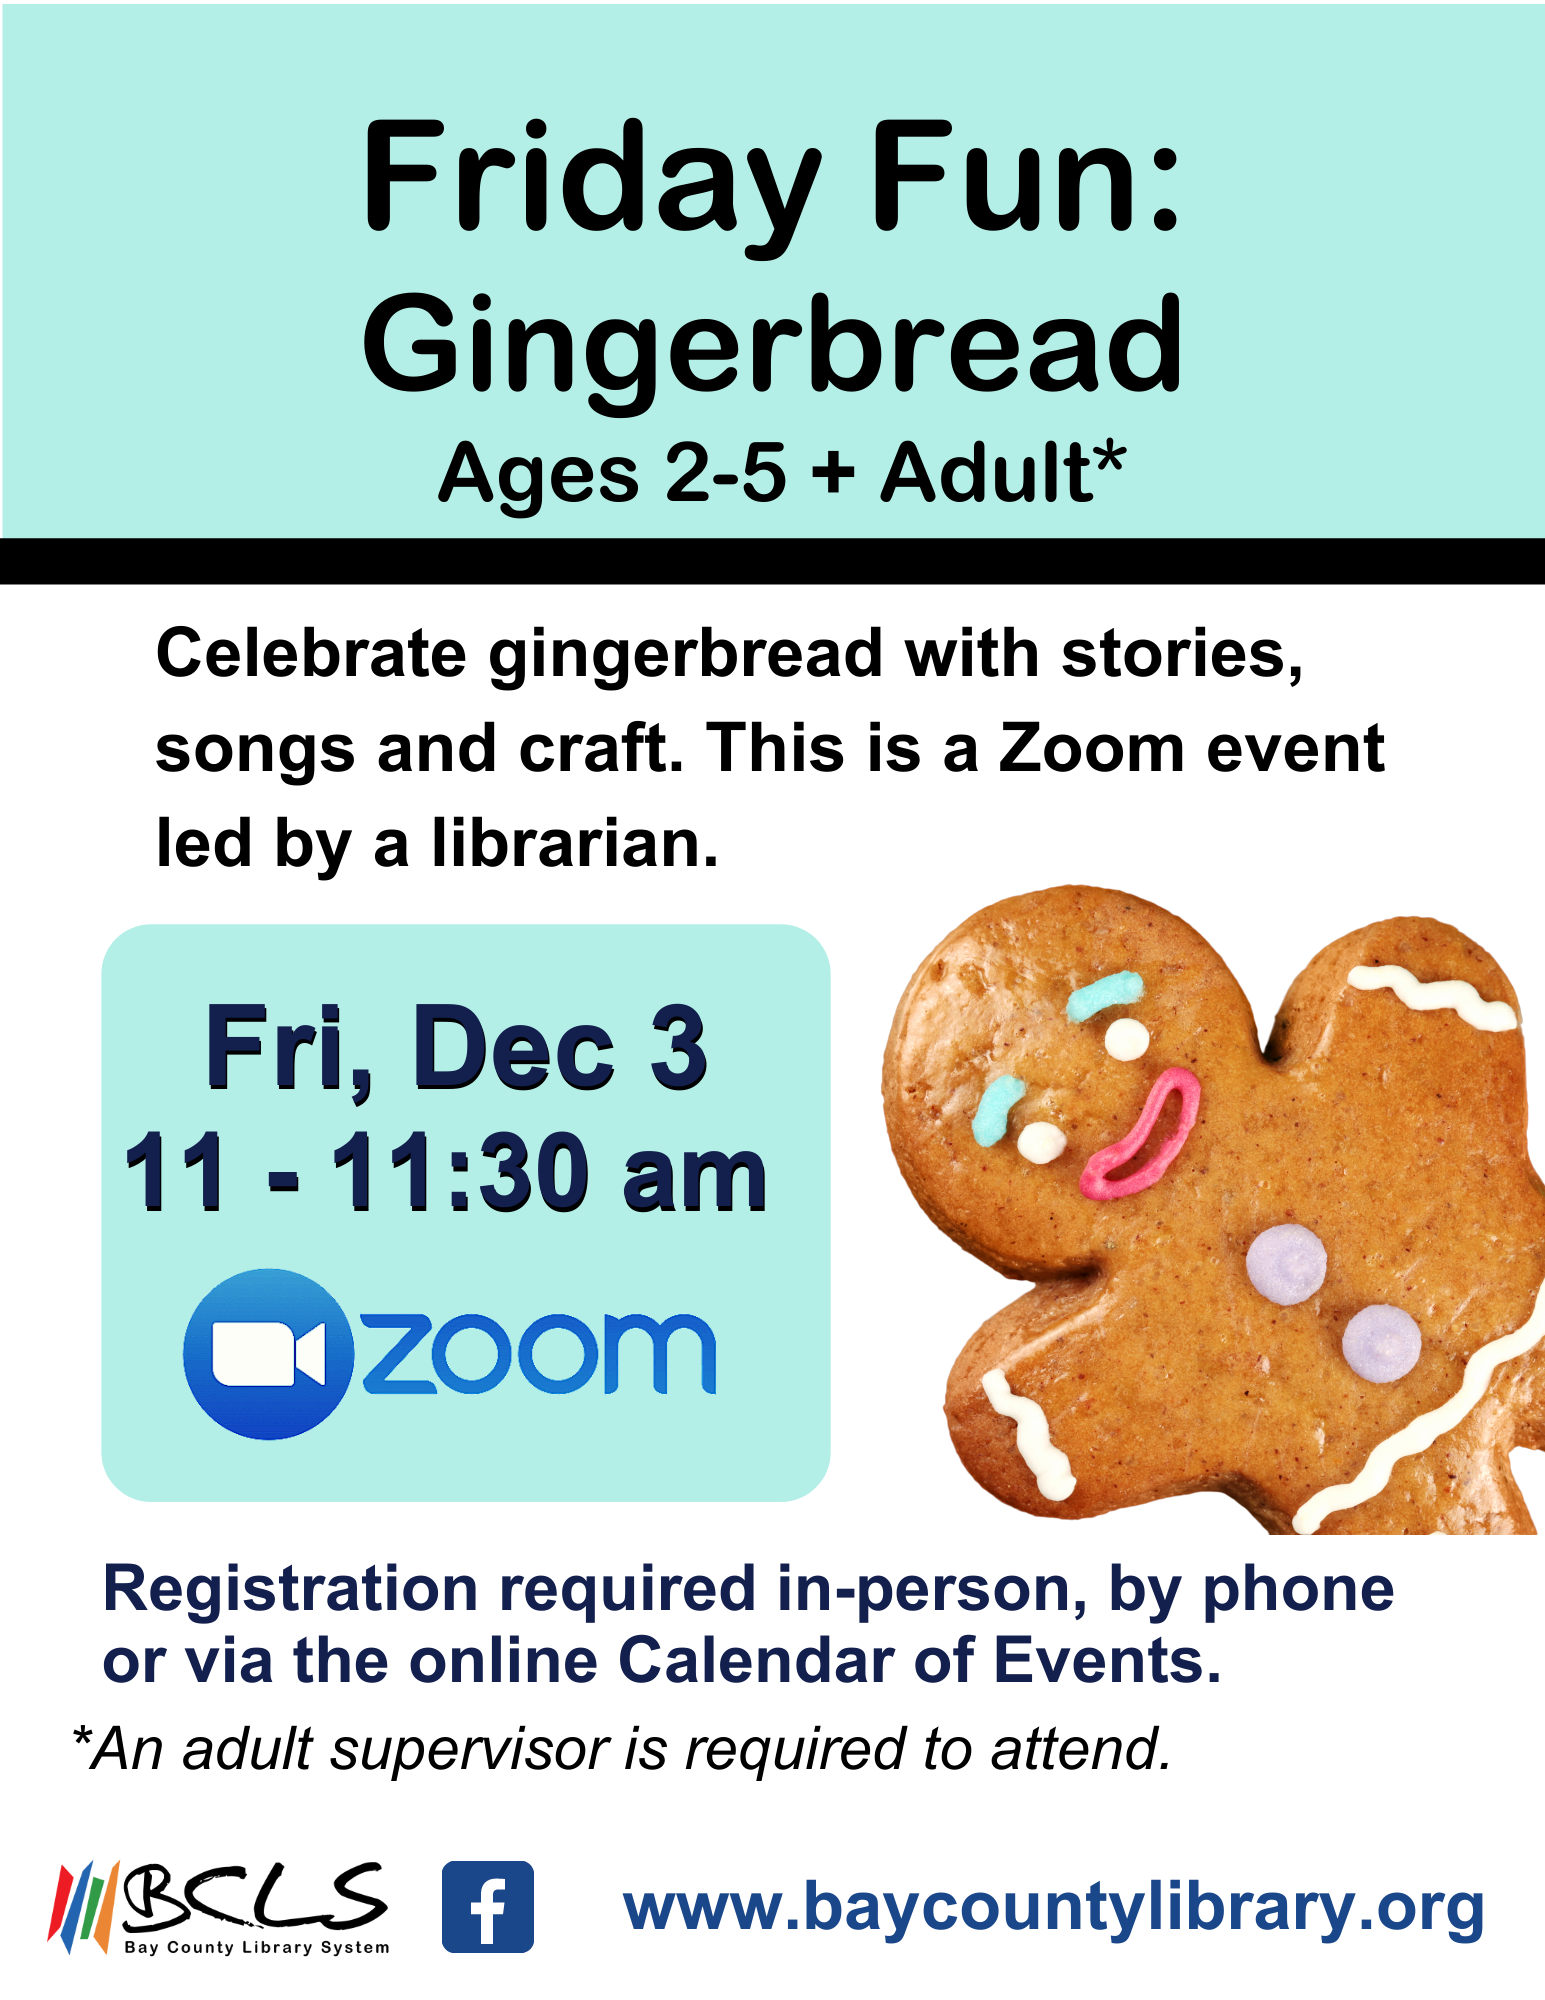 Flyer for Friday Fun: Gingerbread with information